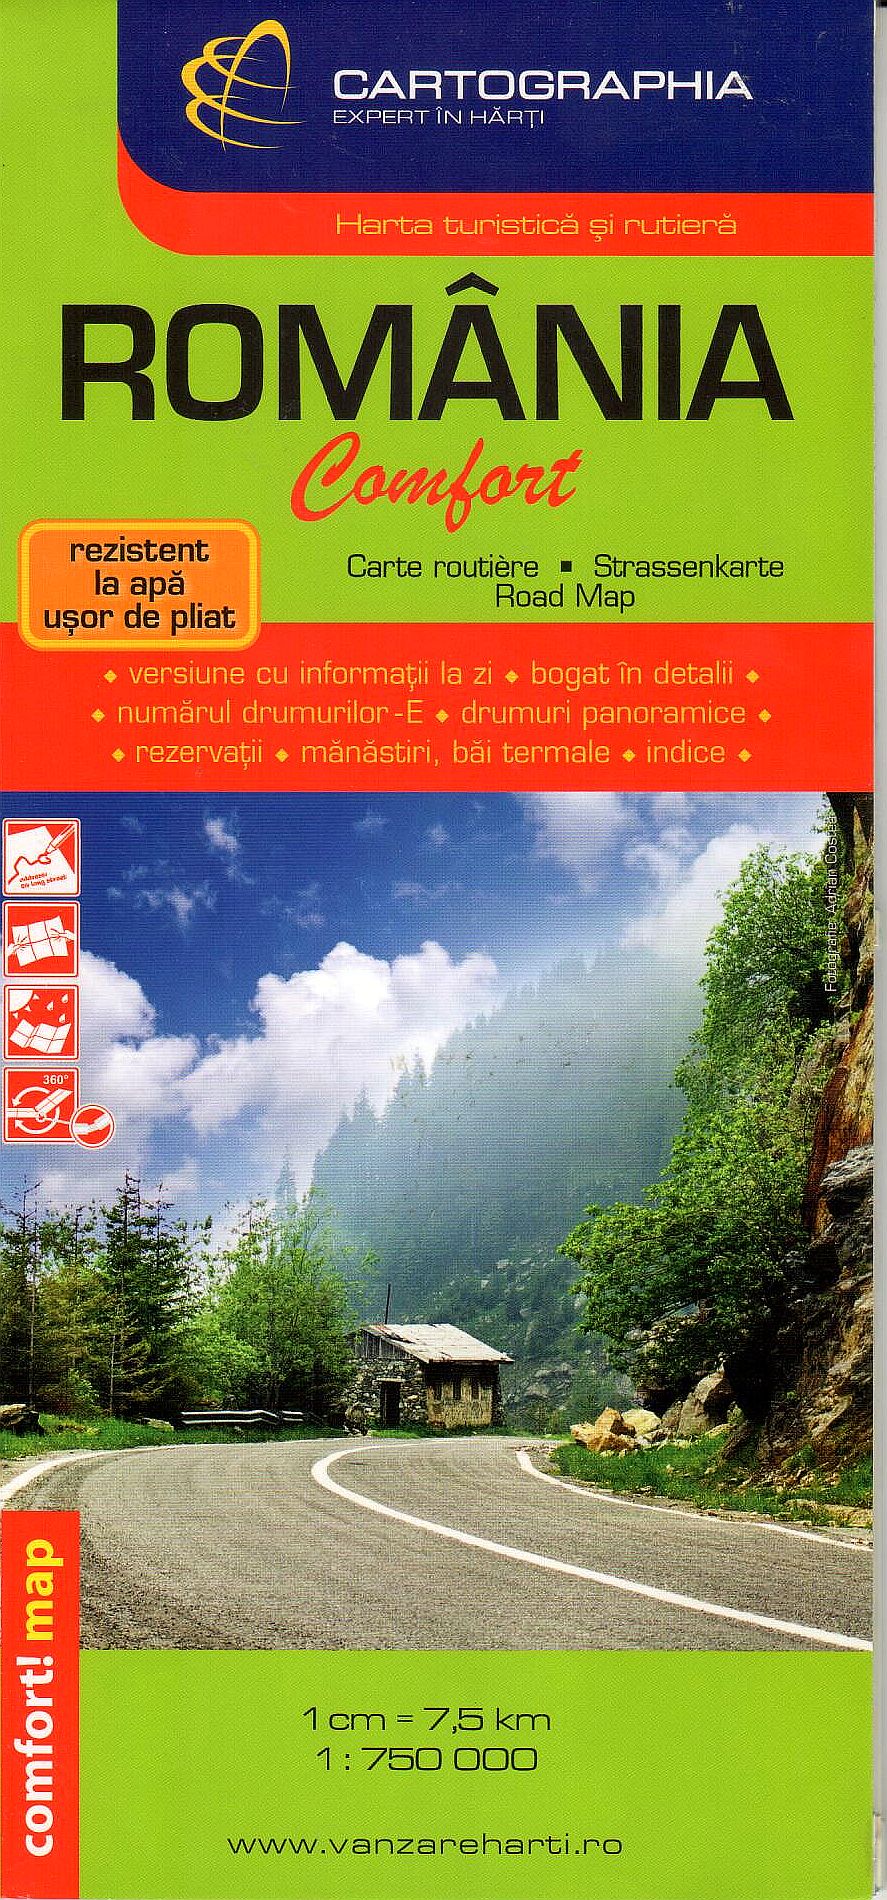  Easy to fold, laminated road map of Romania comfort with index and sights